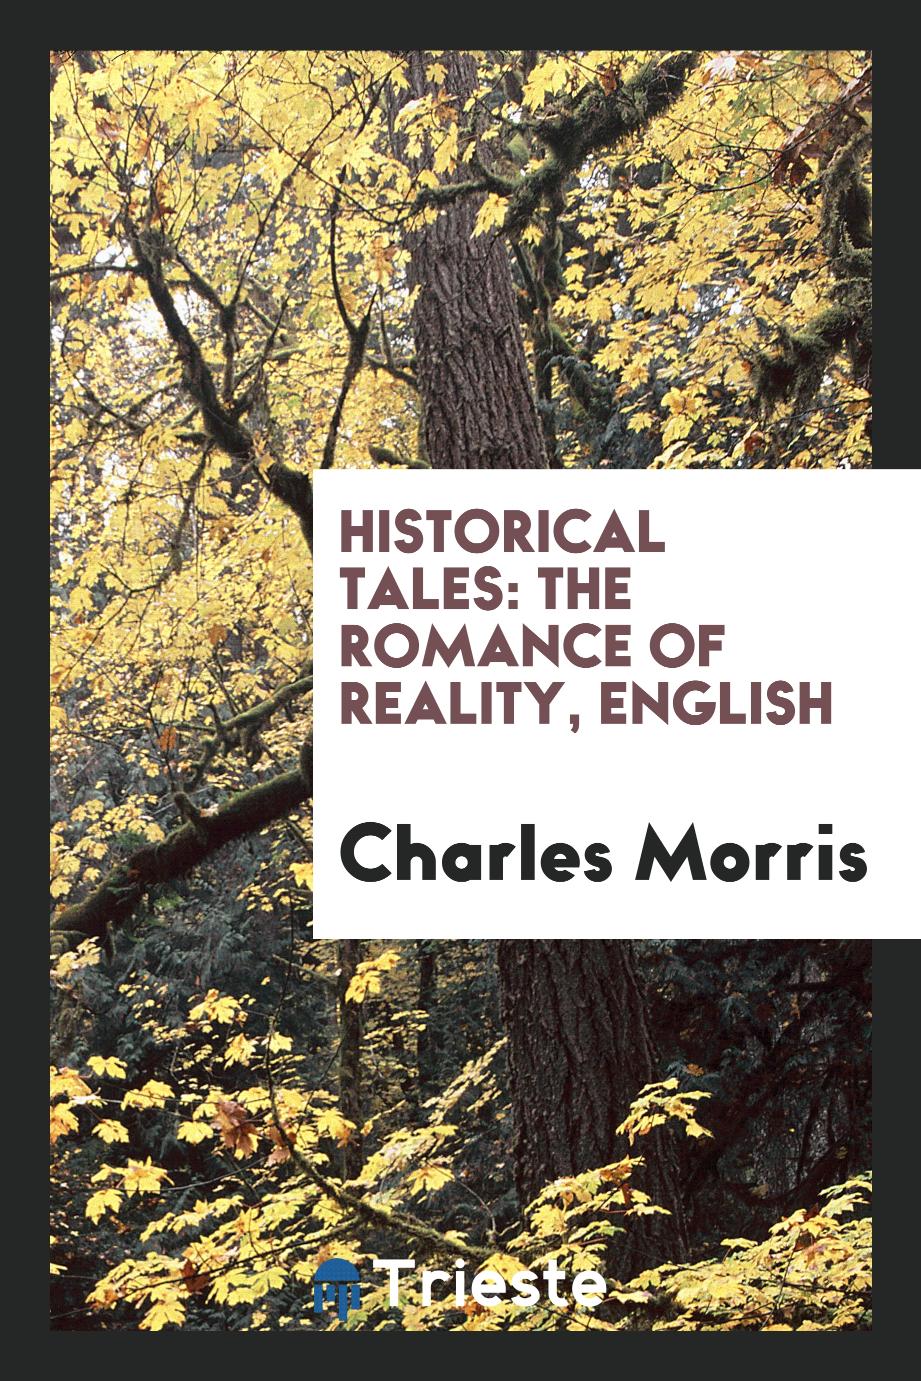 Historical Tales: The Romance of Reality, English